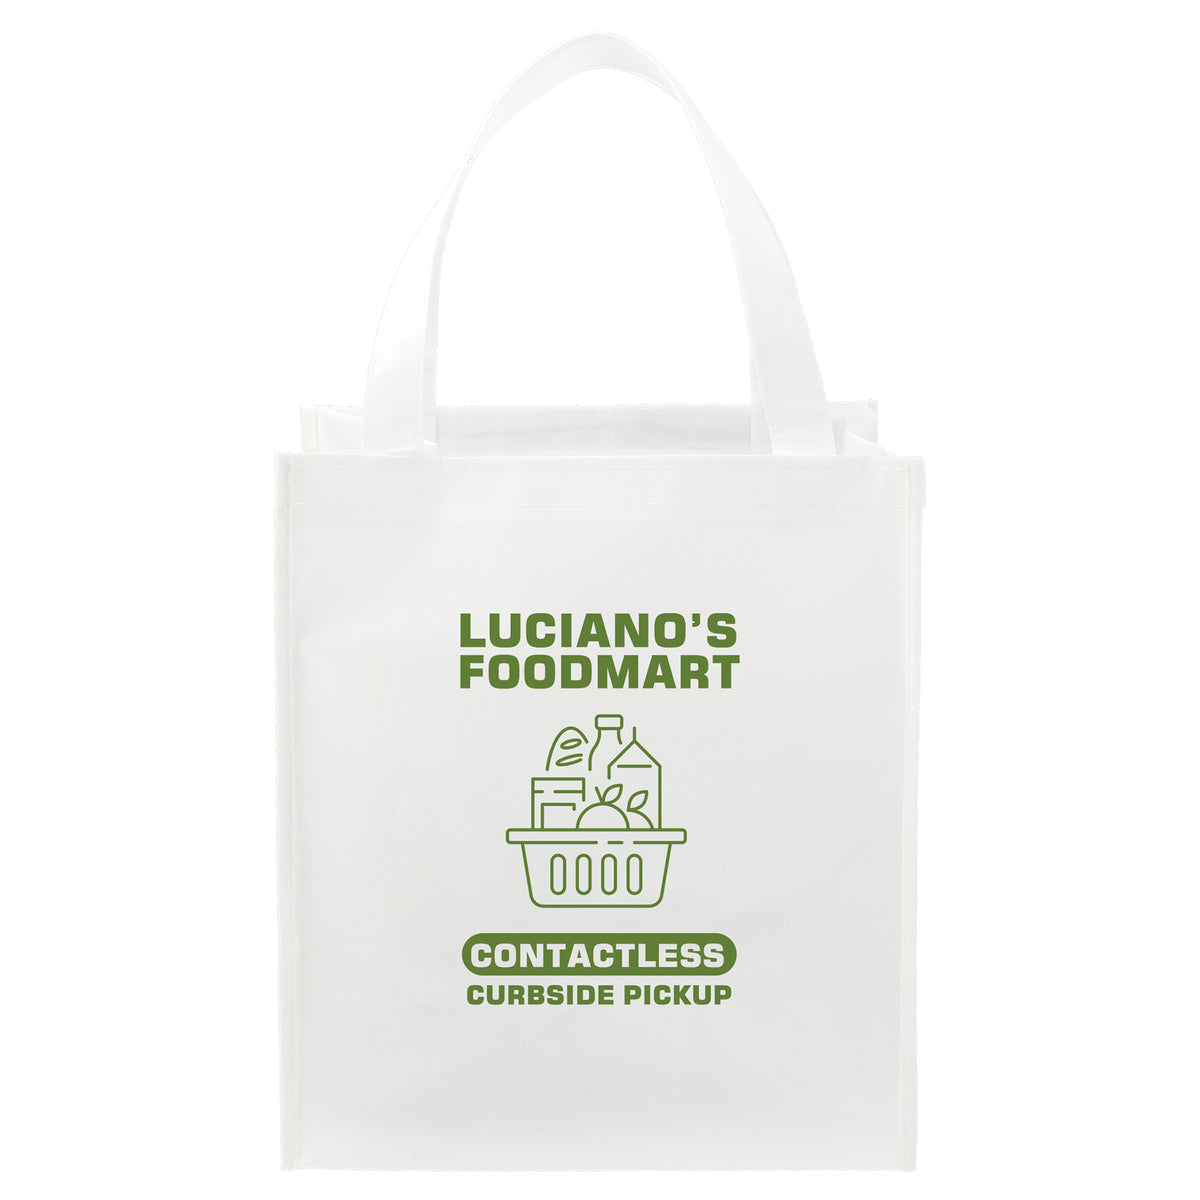 Double Laminated Wipeable Grocery Tote